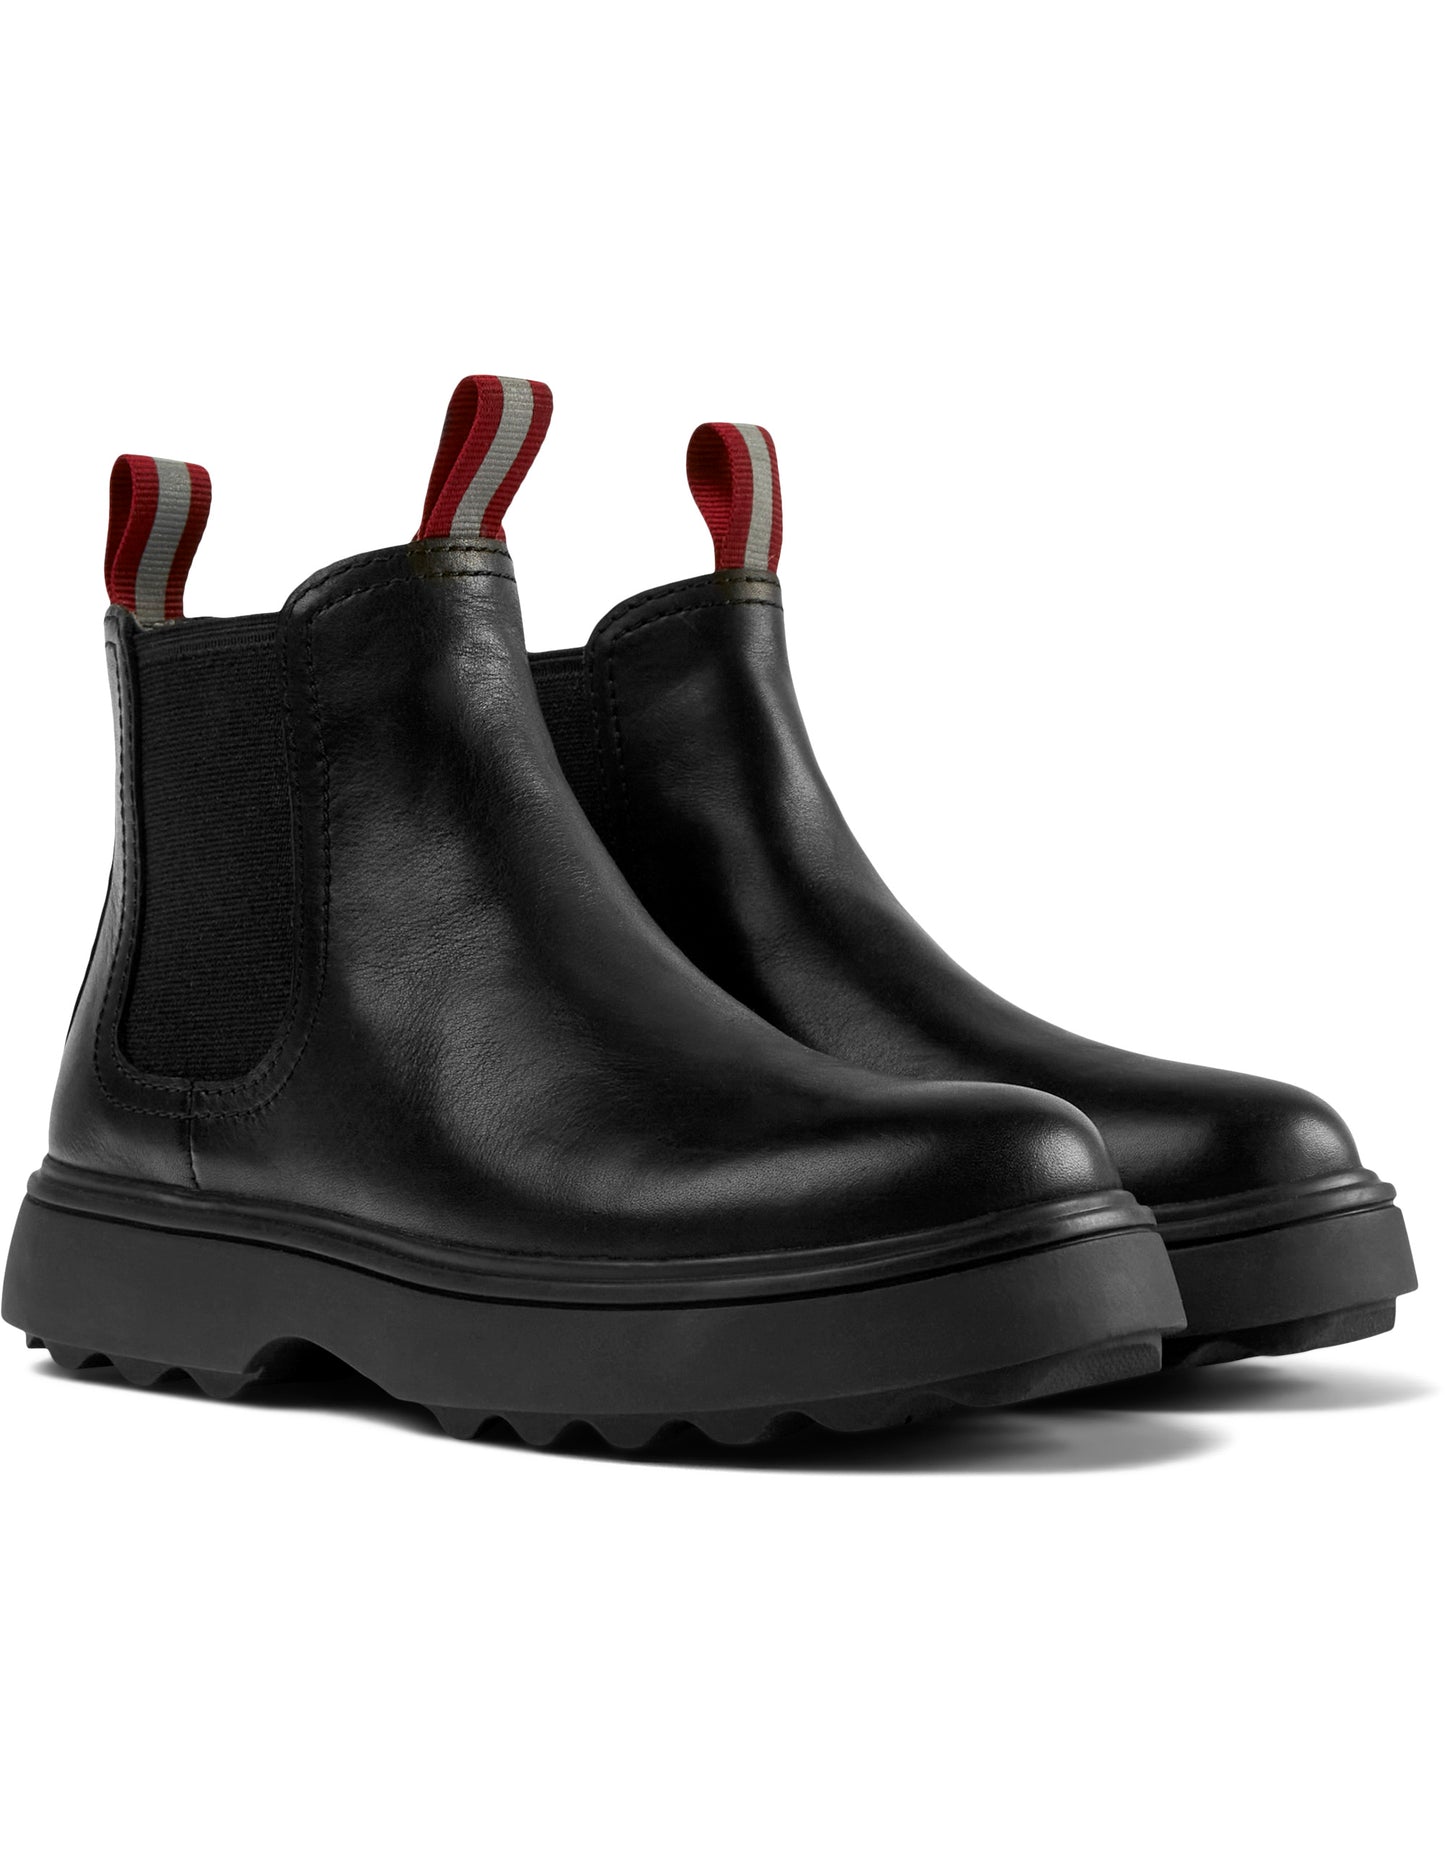 A pair of girls chunky chelsea boots by Camper, style K900149-001,in black leather,pull on style. Angled view.